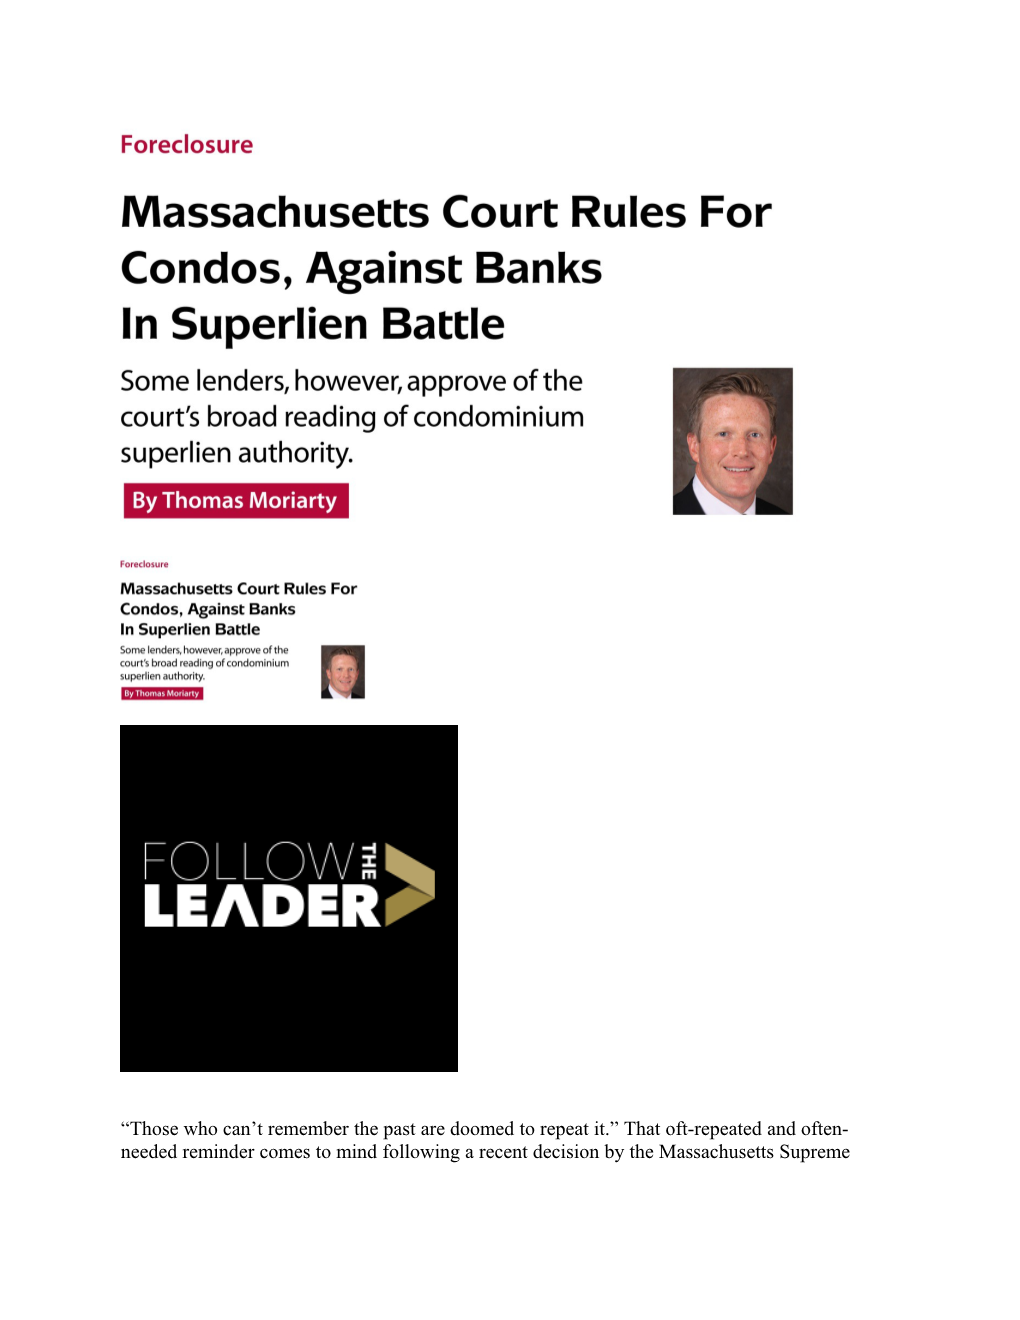 The History of the Rolling Lien, and the Massachusetts Superlien Statute on Which It Is